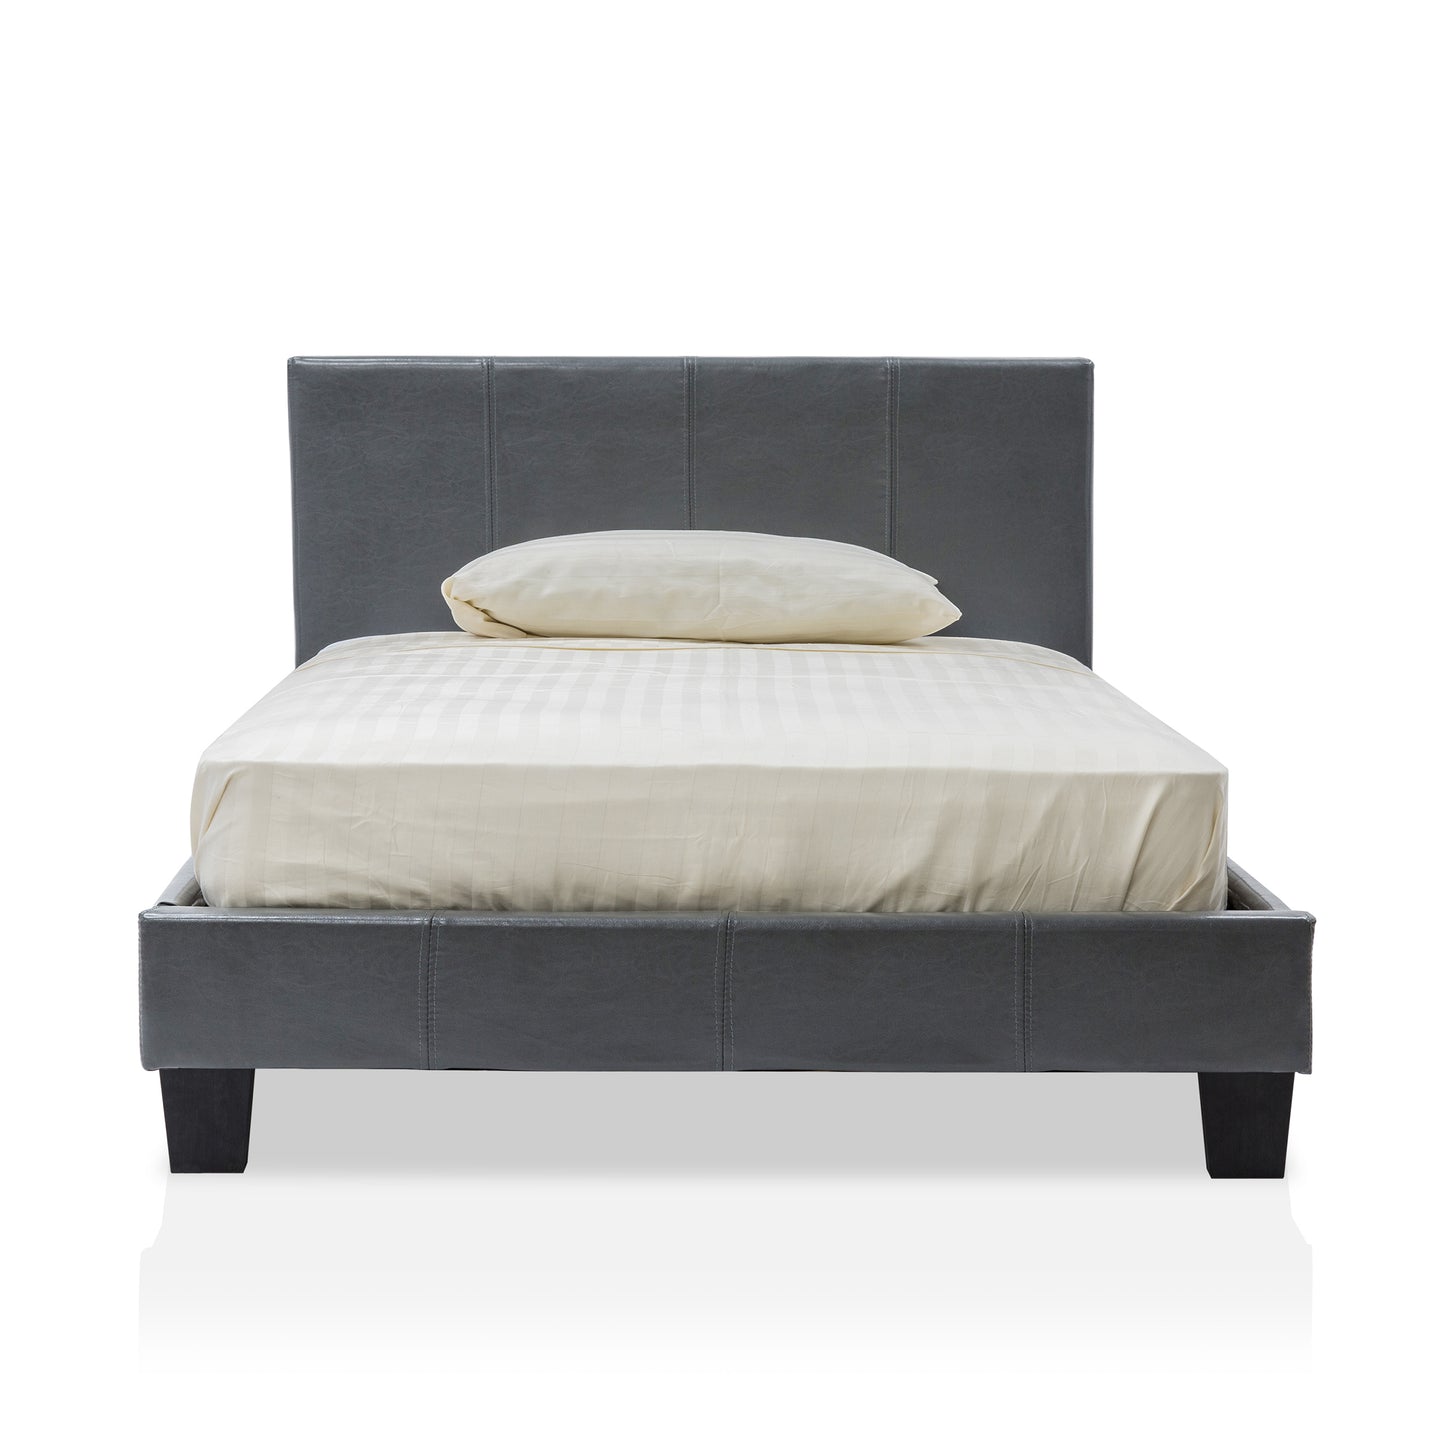 Front-facing contemporary gray faux leather full platform bed with linens on a white background